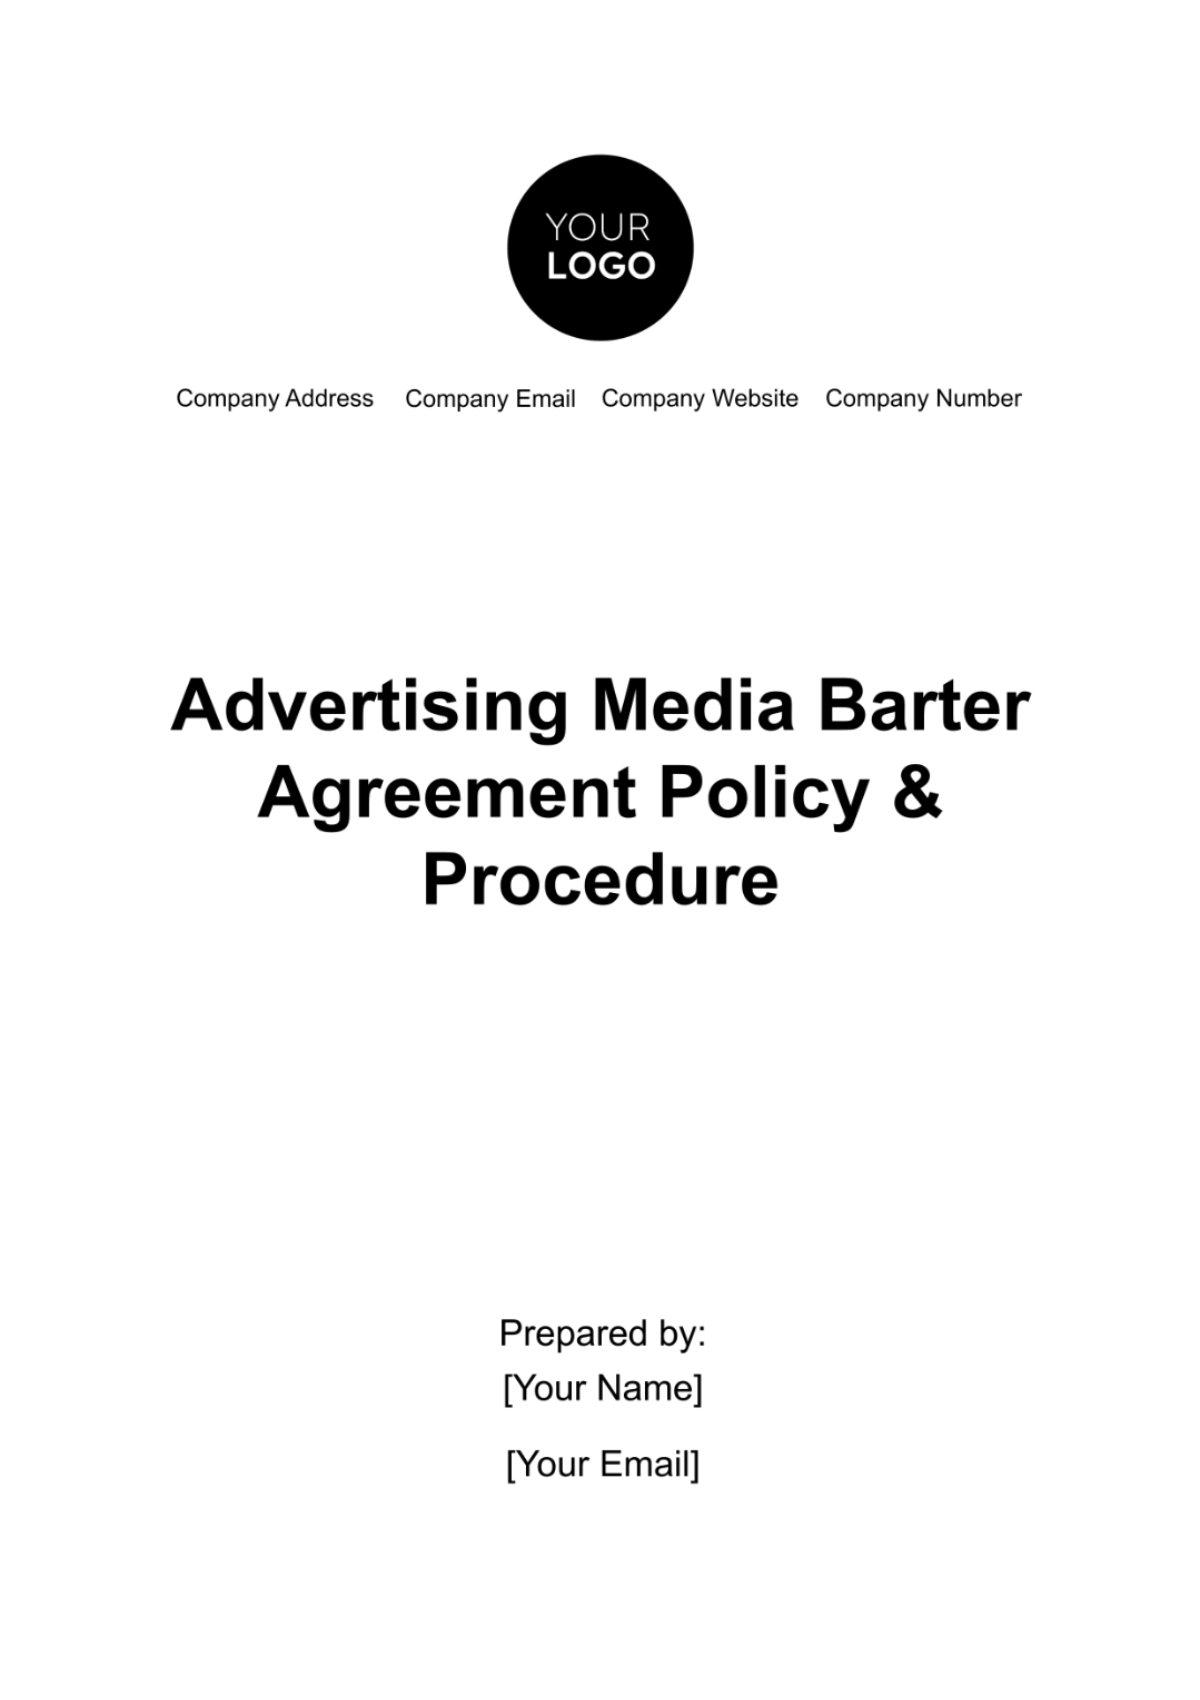 Free Advertising Media Barter Agreement Policy & Procedure Template